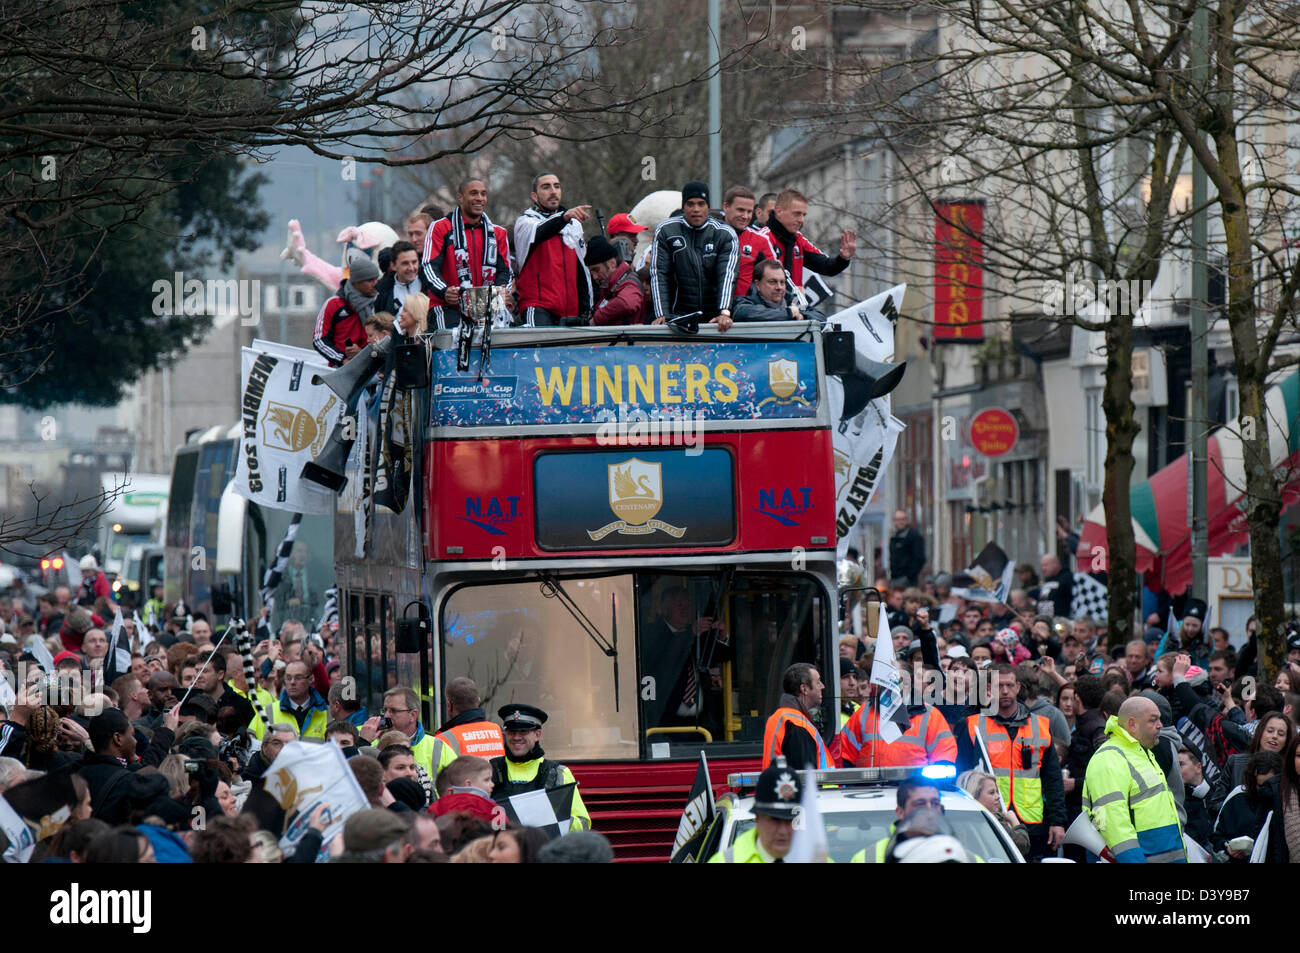 Swansea, Wales, UK. 26th February 2013. Swansea City Football team and fans celebrating during an open-top bus parade through the centre of Swansea after beating Bradford City 5-0 in Sunday's Capital One Cup final at Wembley to win the Capital Cup trophy. Credit:  Phil Rees / Alamy Live News Stock Photo